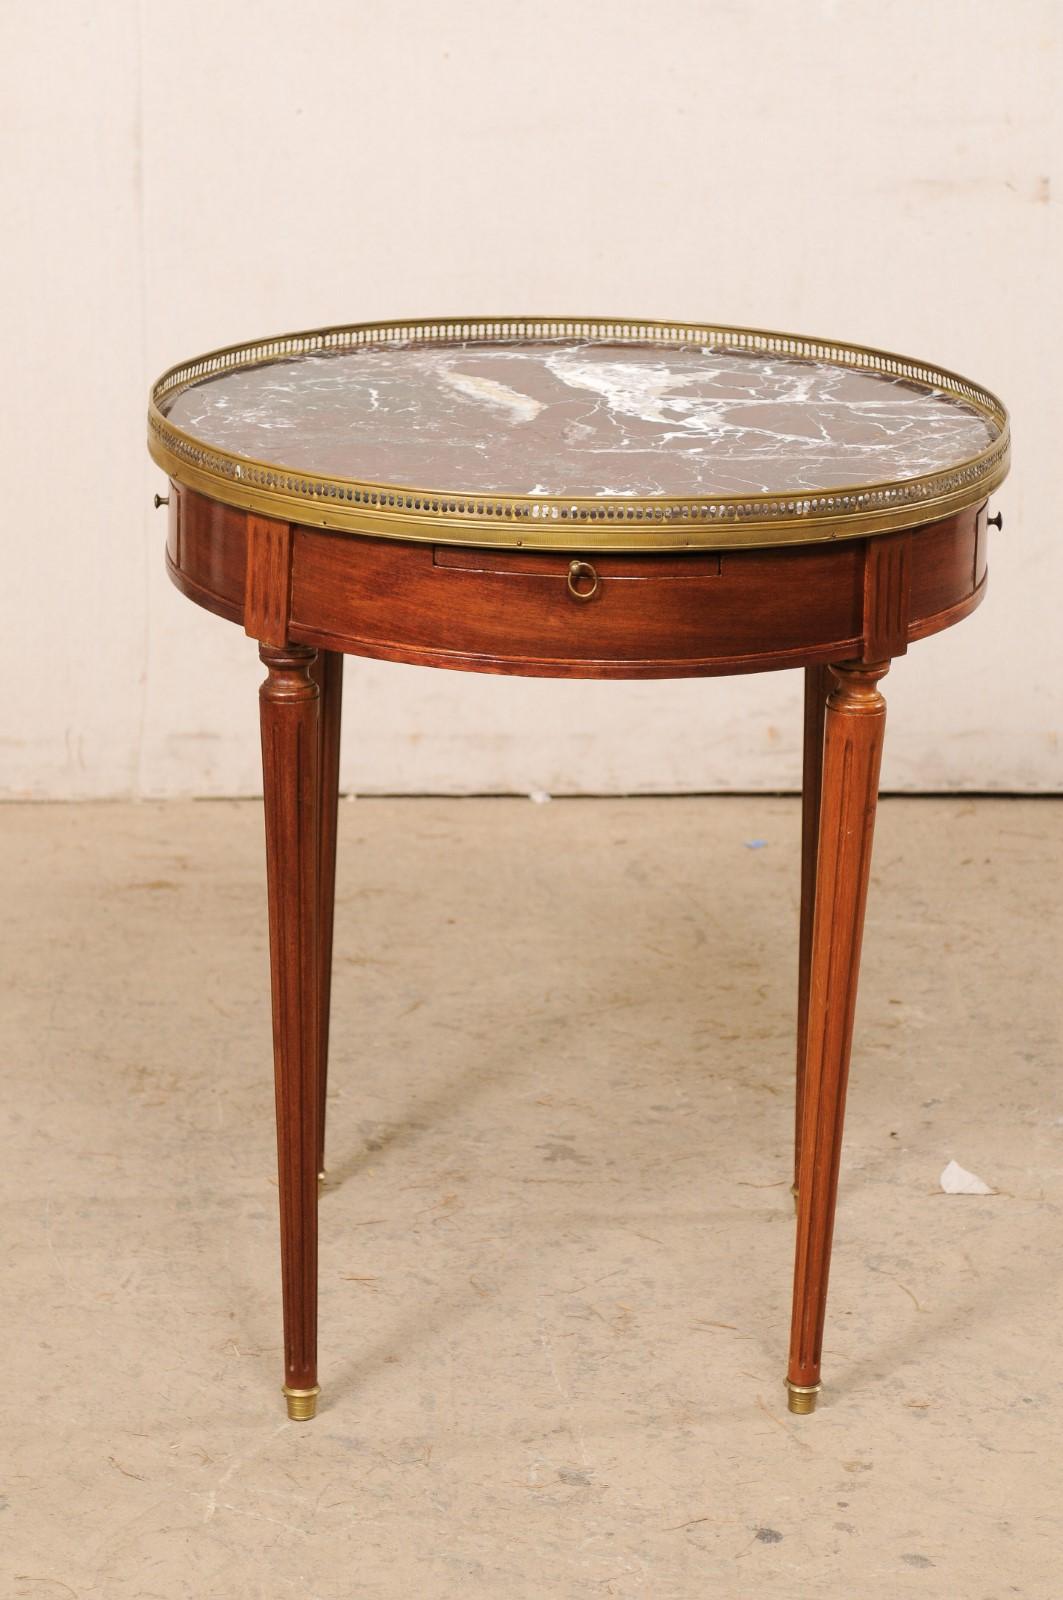 French Antique Round Cherry Wood Table W/Marble Top & Brass Gallery and Feet For Sale 1